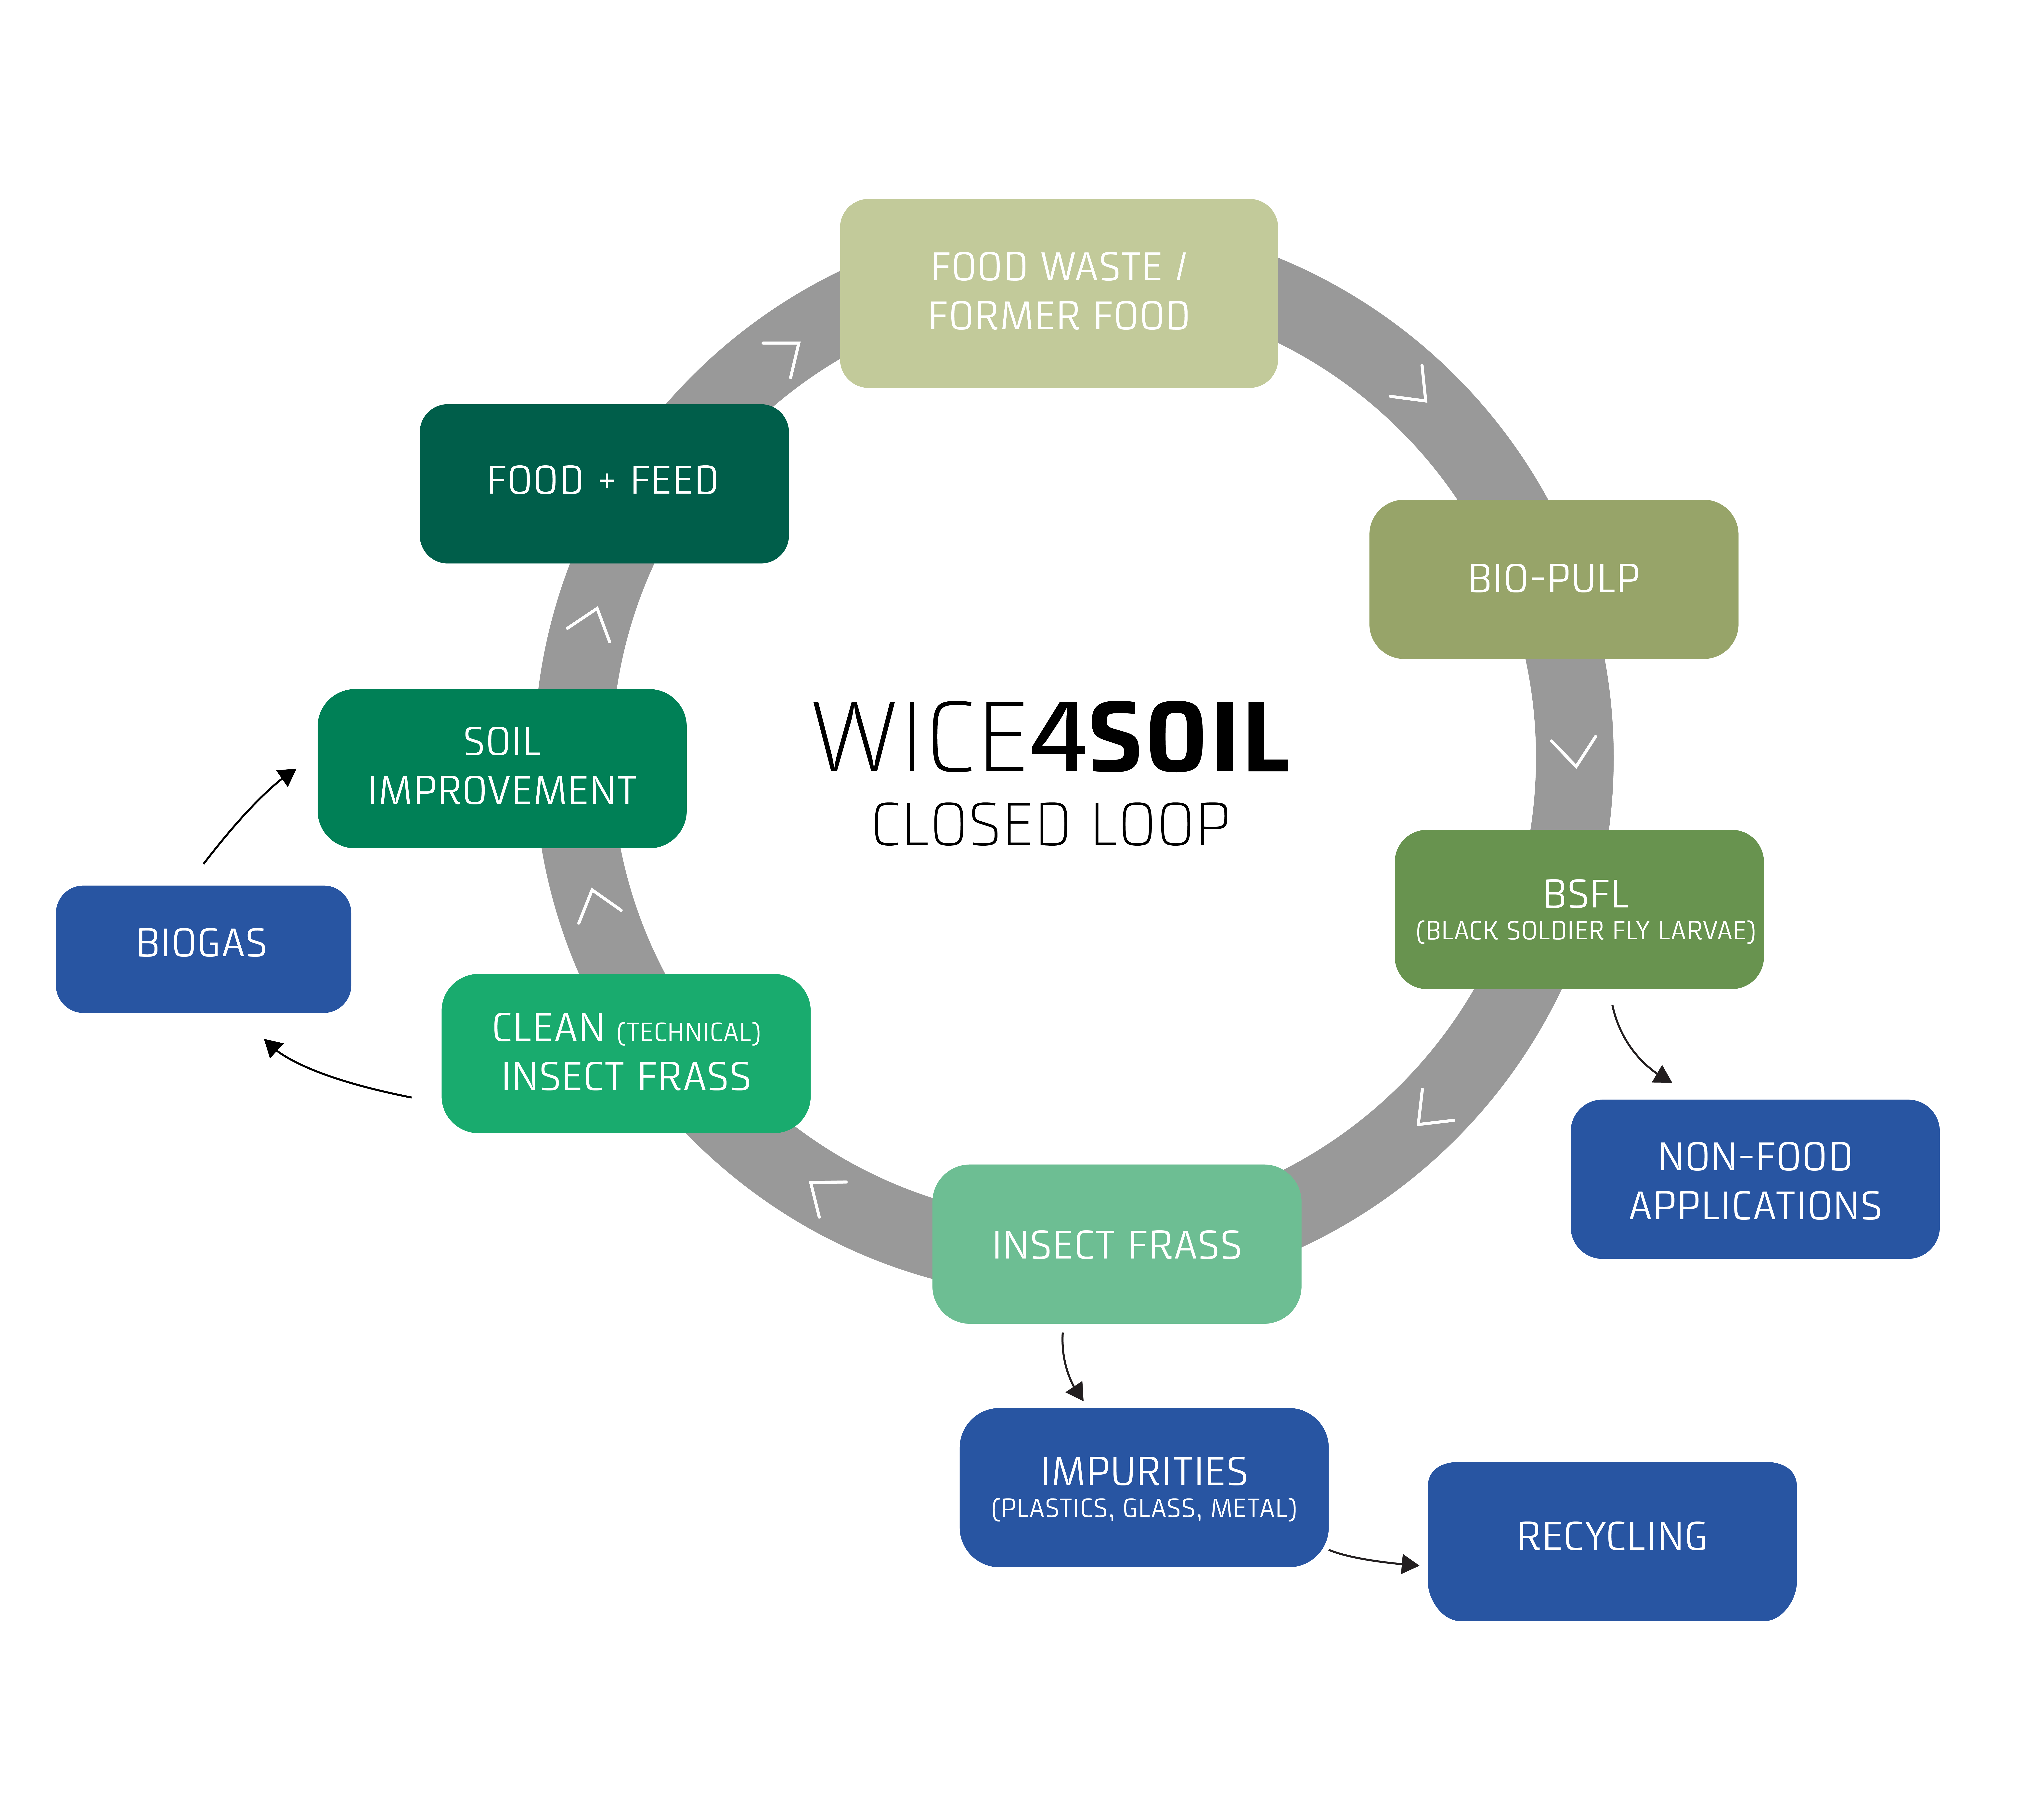 An illustration of how WICE4Soil supports a circular food waste treatment economy